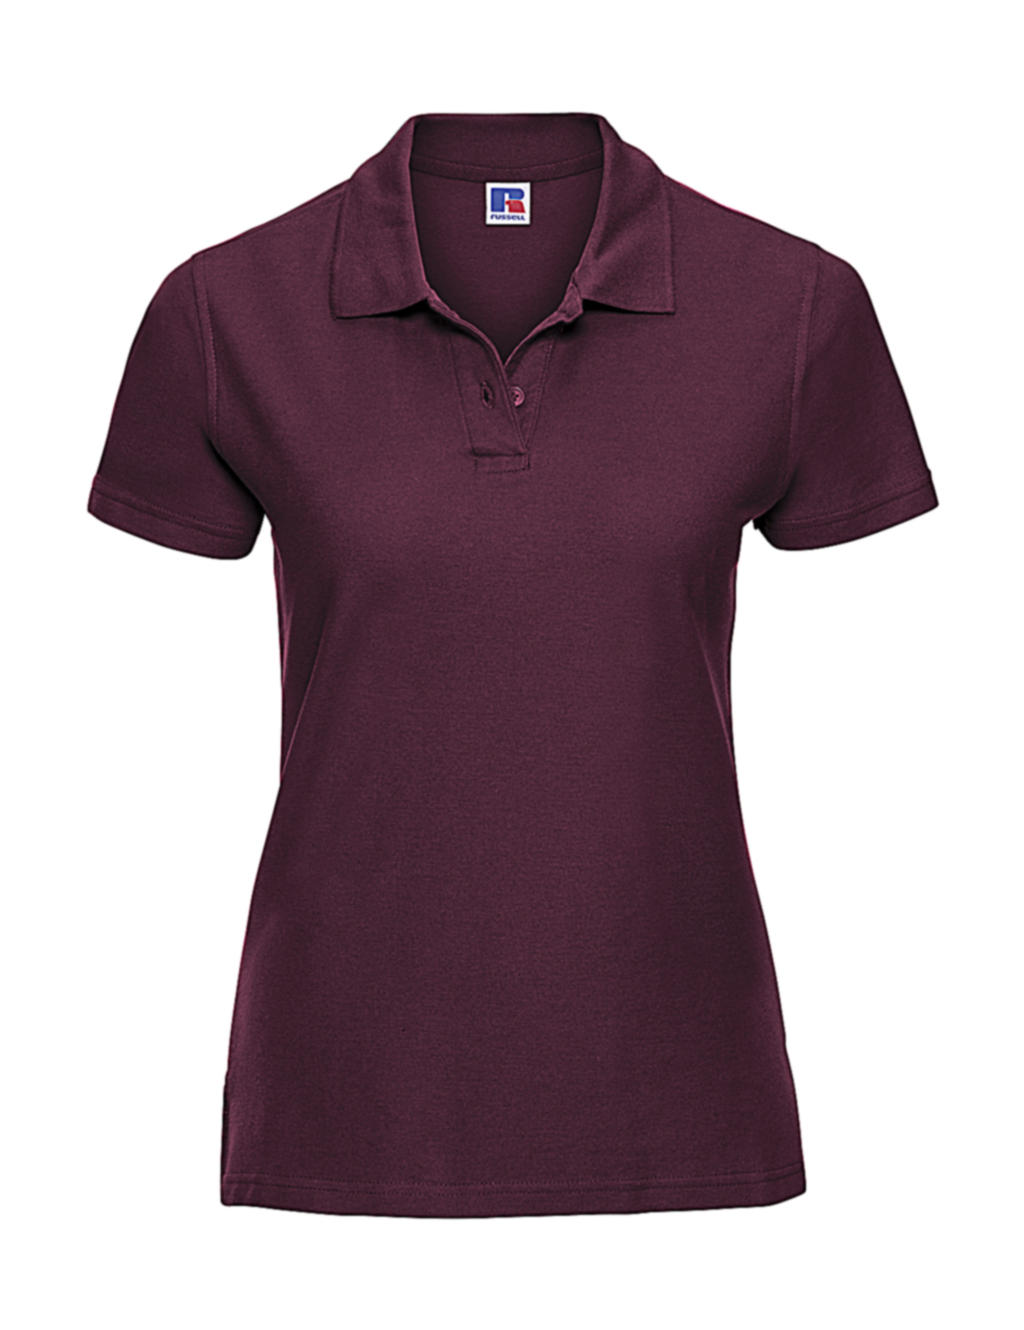  Ladies Ultimate Cotton Polo in Farbe Burgundy